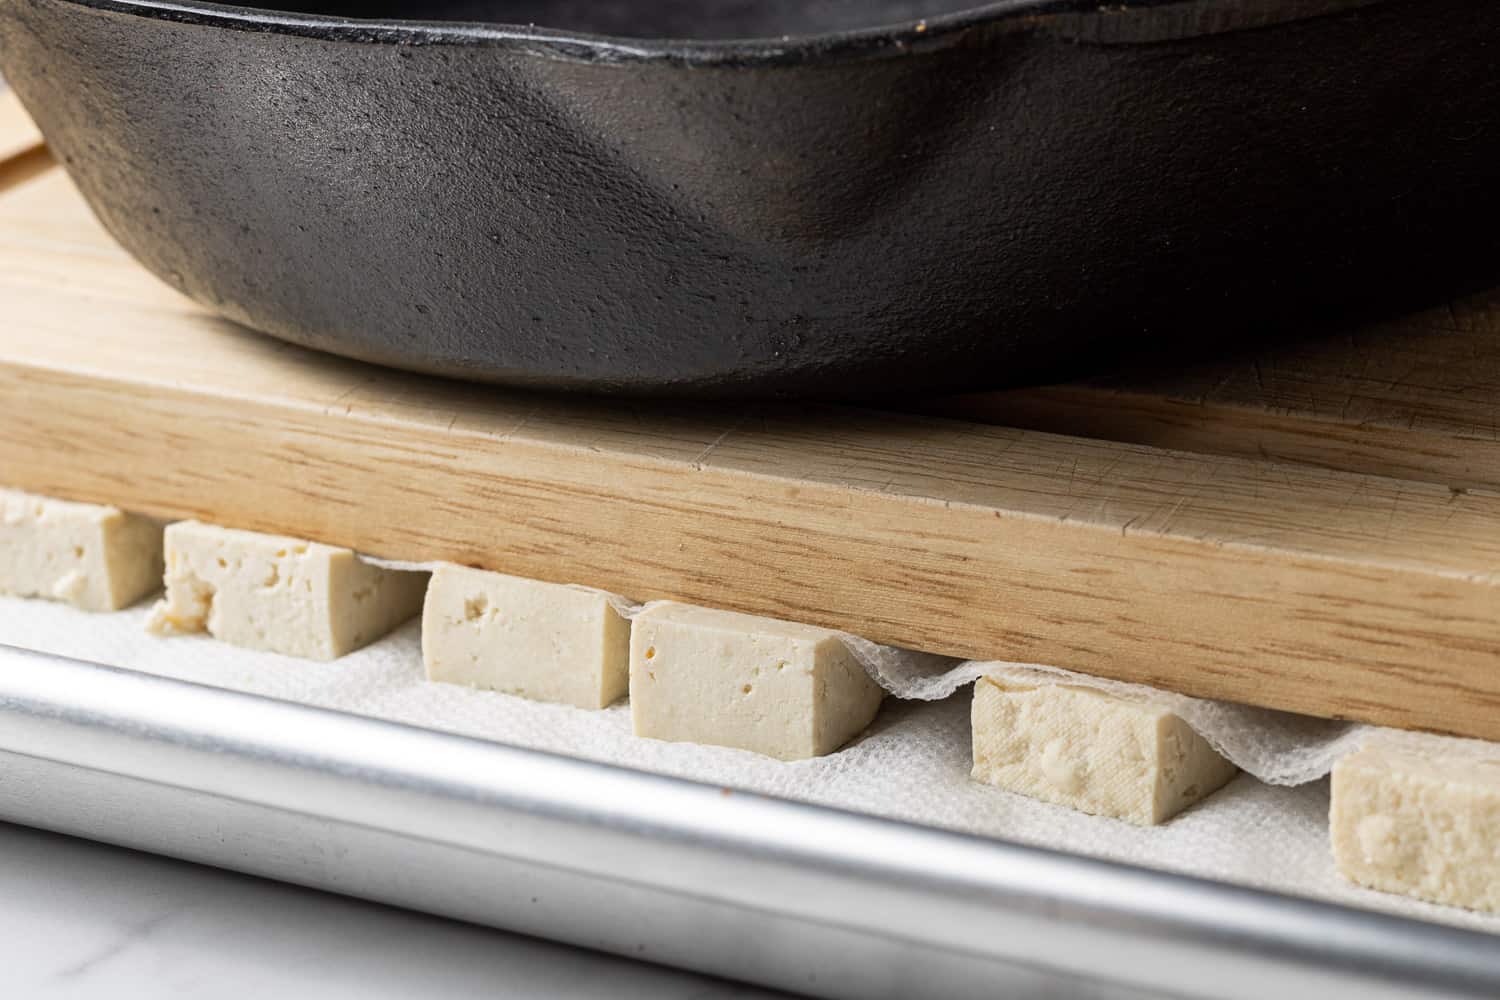 Tofu cubes on a sheet pan with paper towels, topped with cutting board and frying pan, showing how to press tofu.